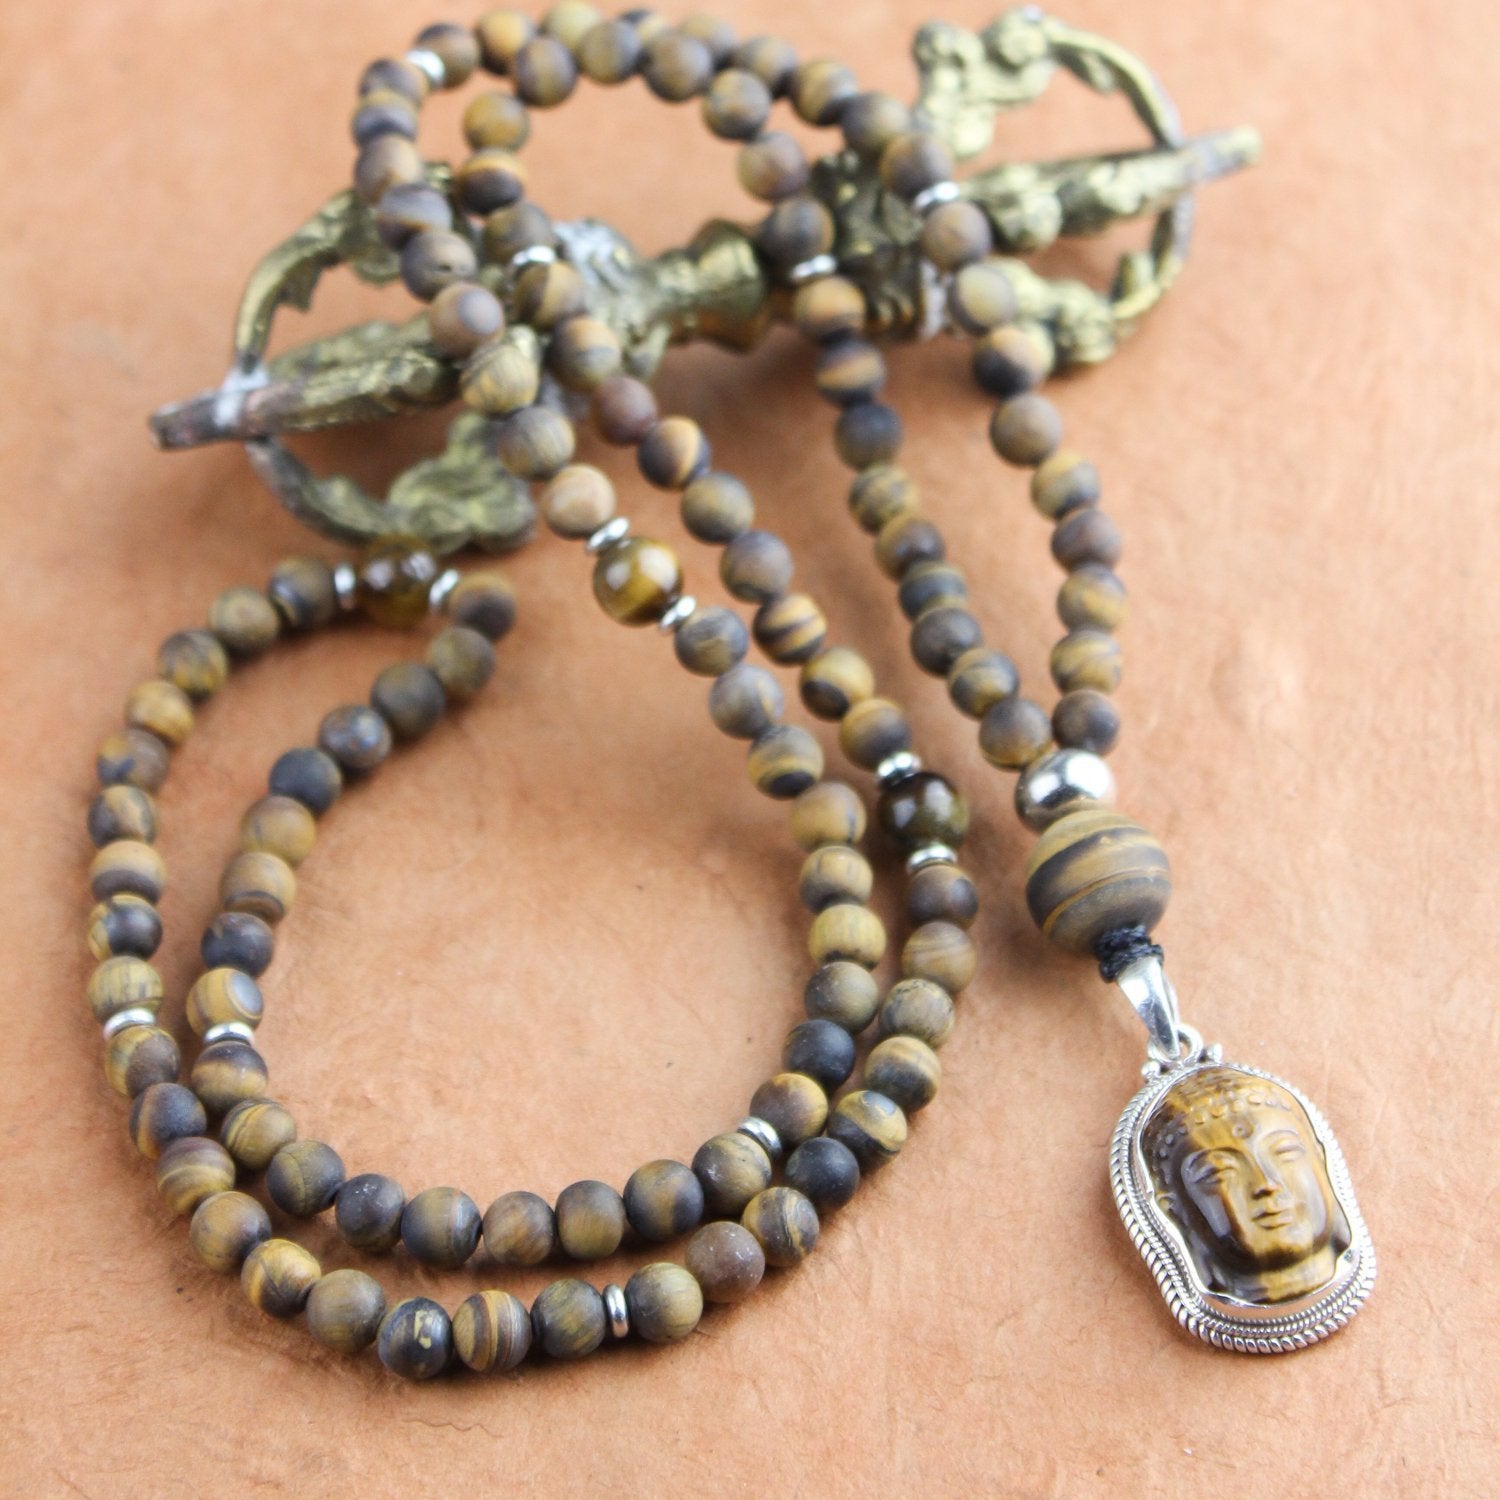 Calm Understanding Tiger Eye and Skull Mala Beads Necklace - DharmaShop